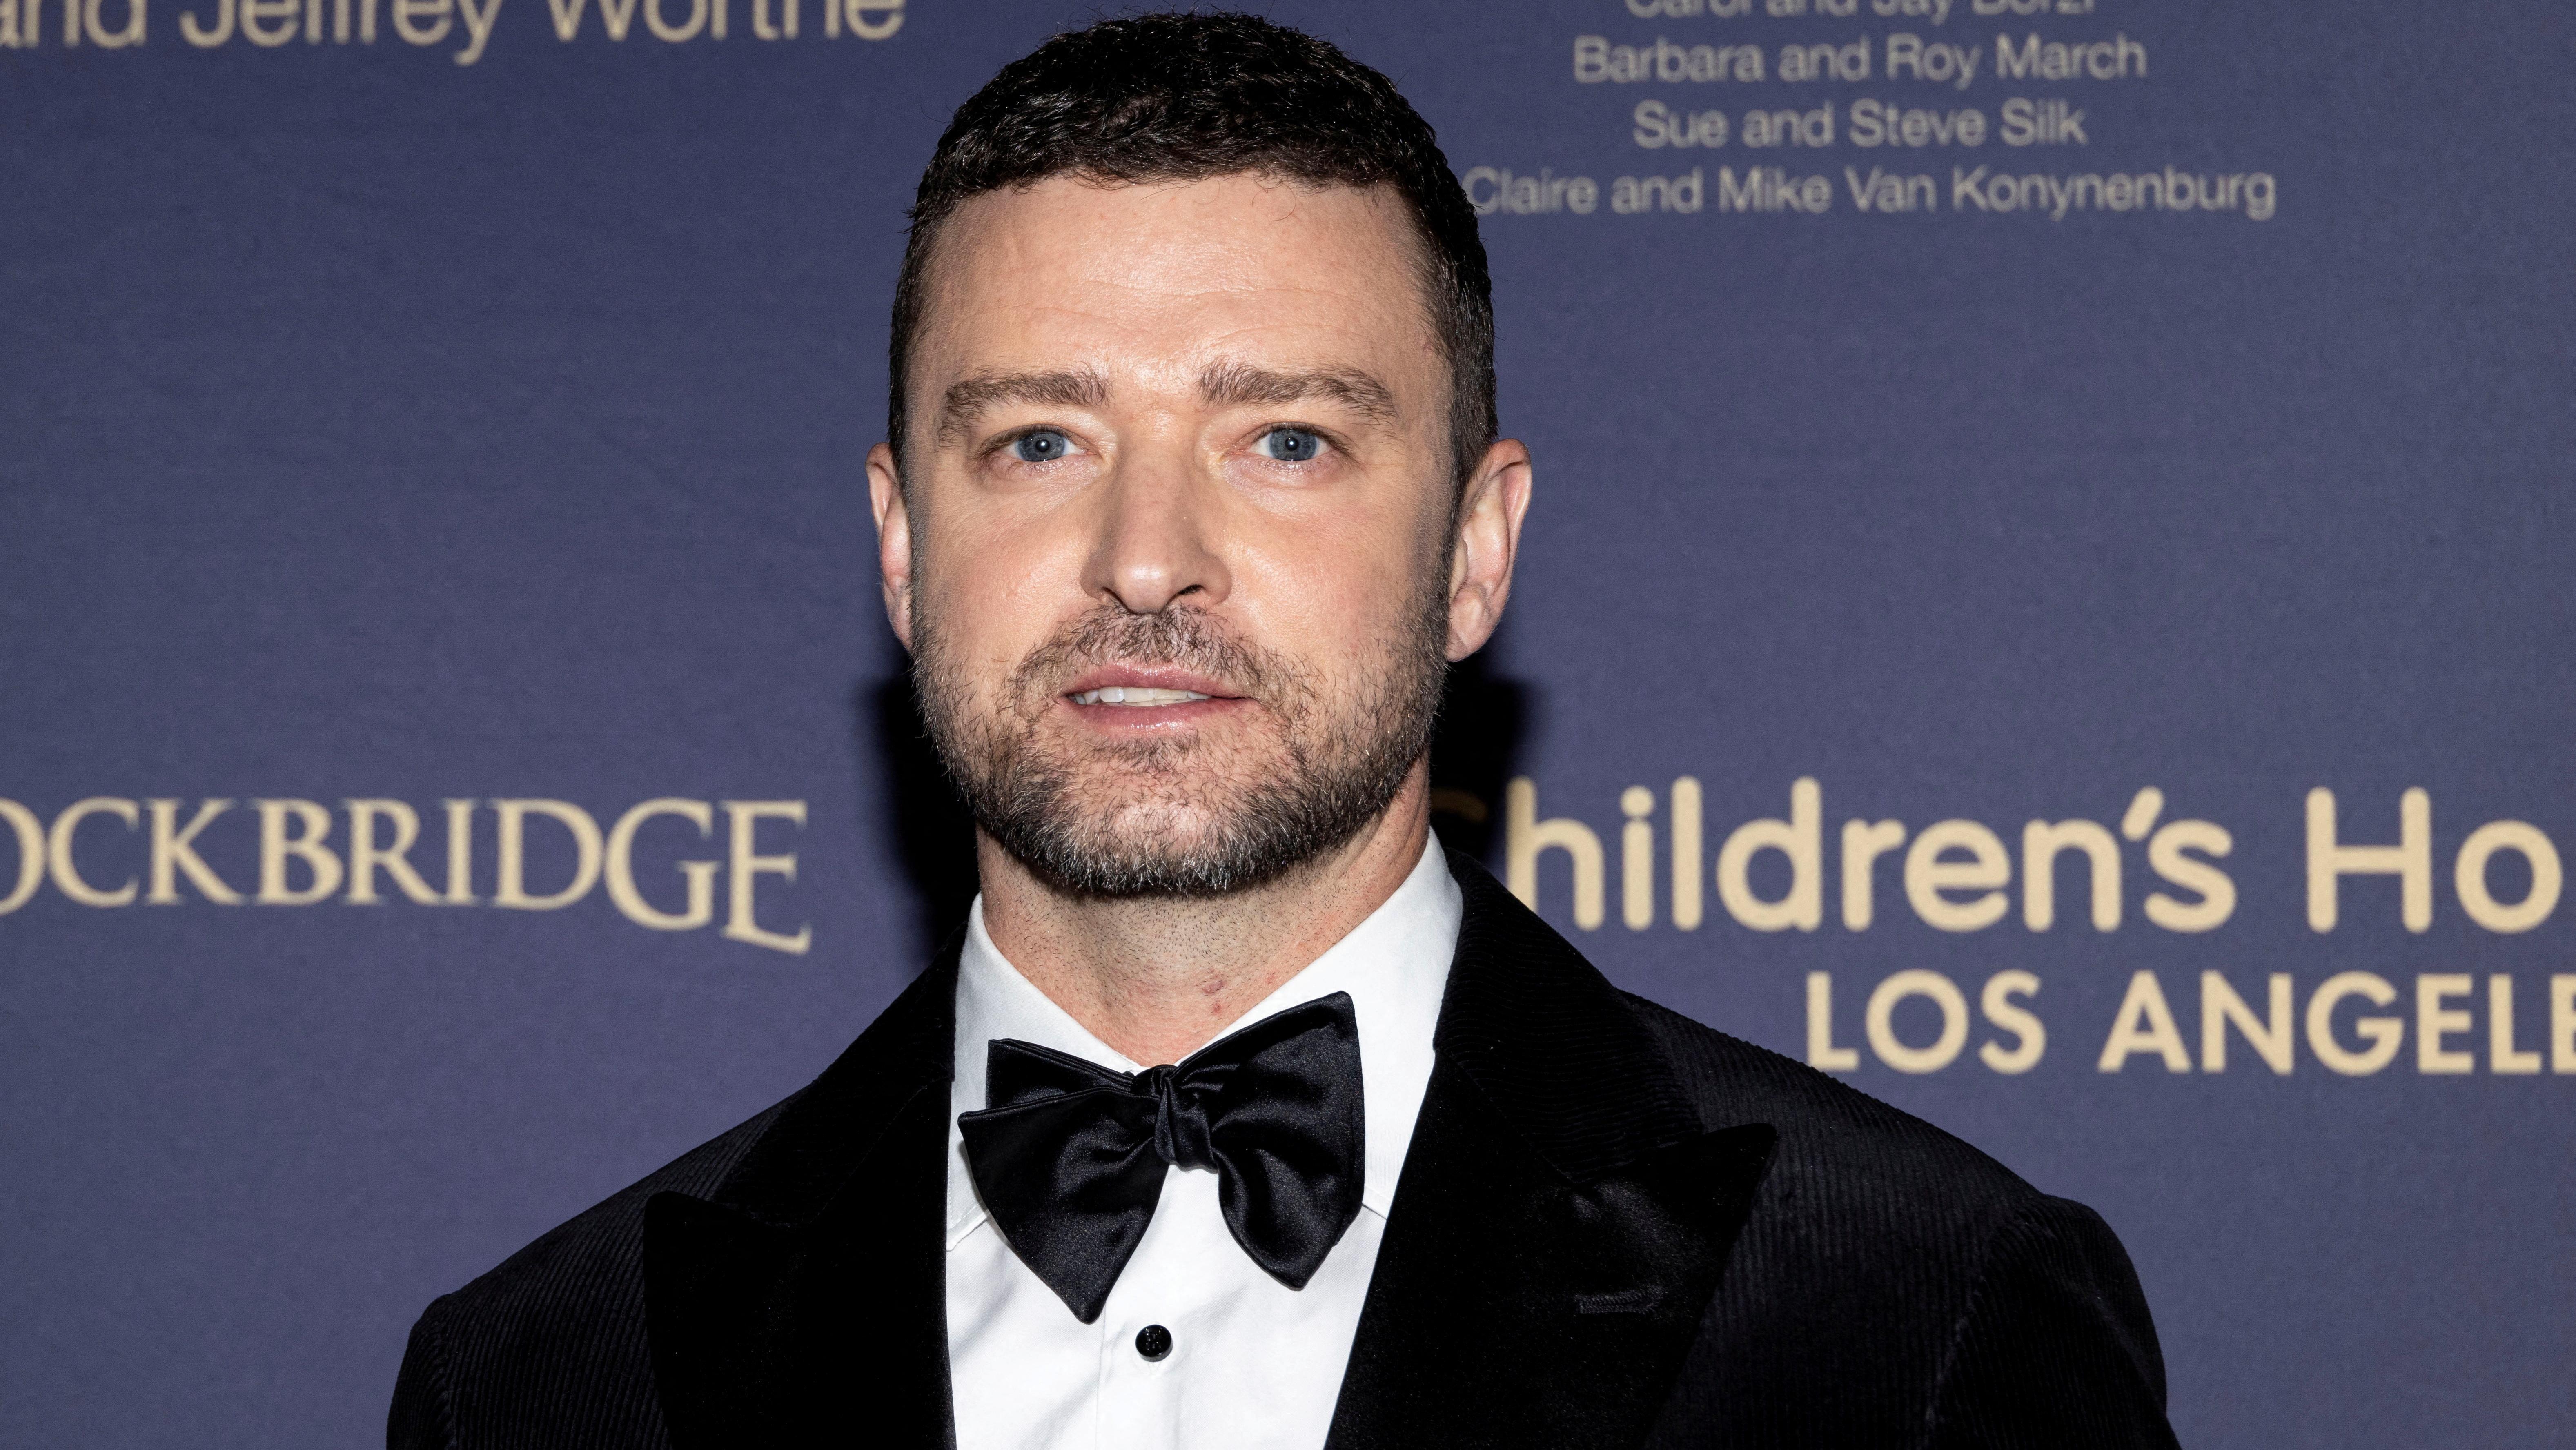 Timberlake not intoxicated during arrest, lawyer says